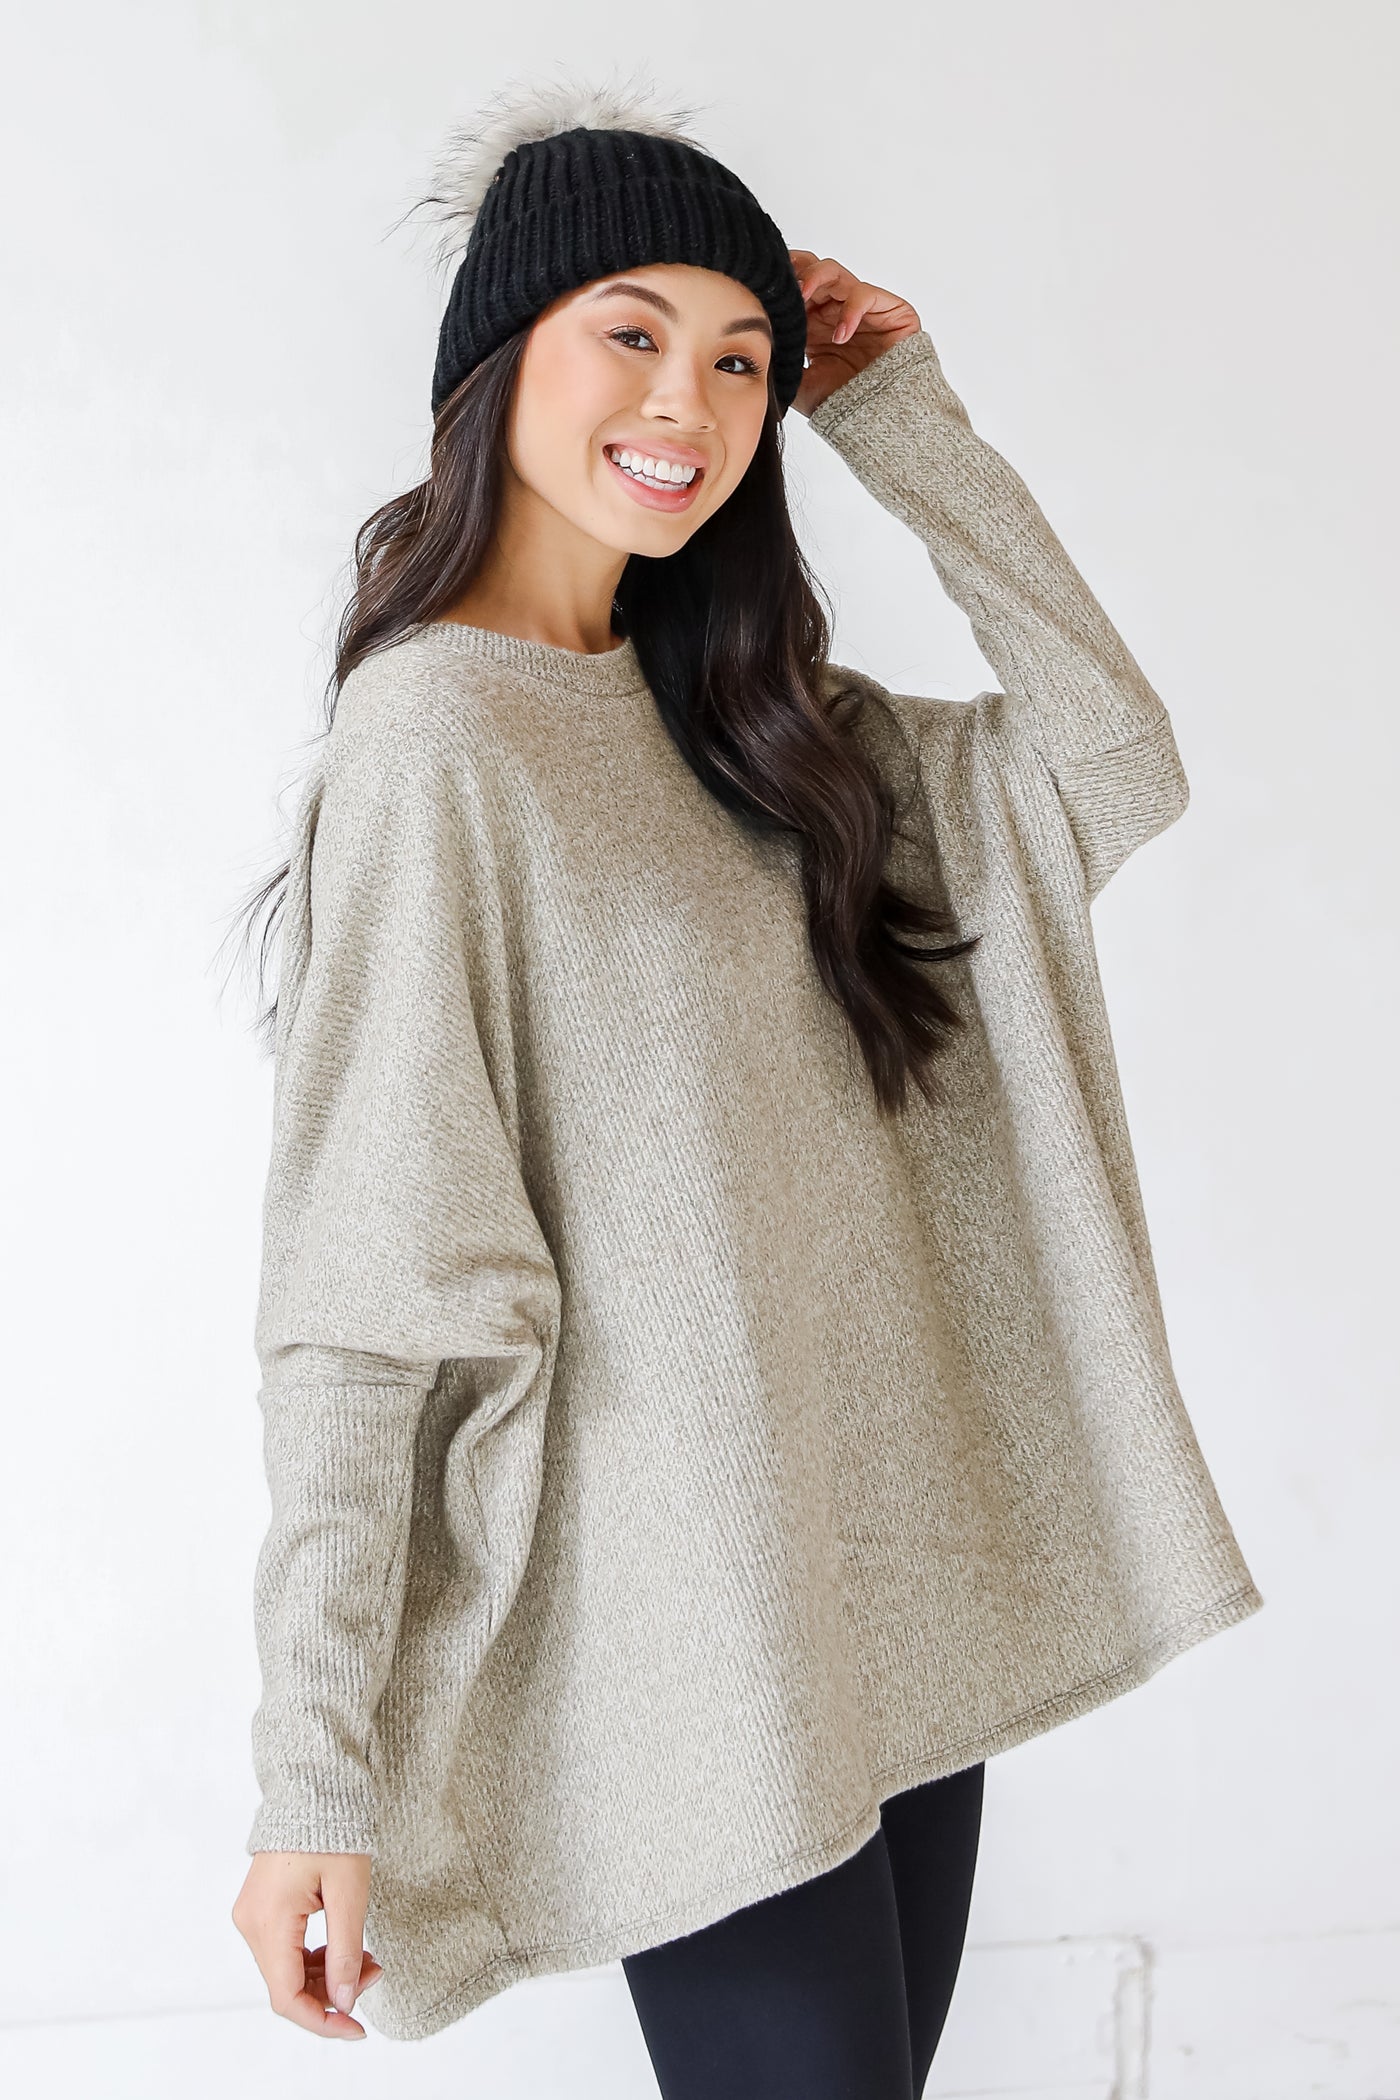 Oversized Sweater in olive side view